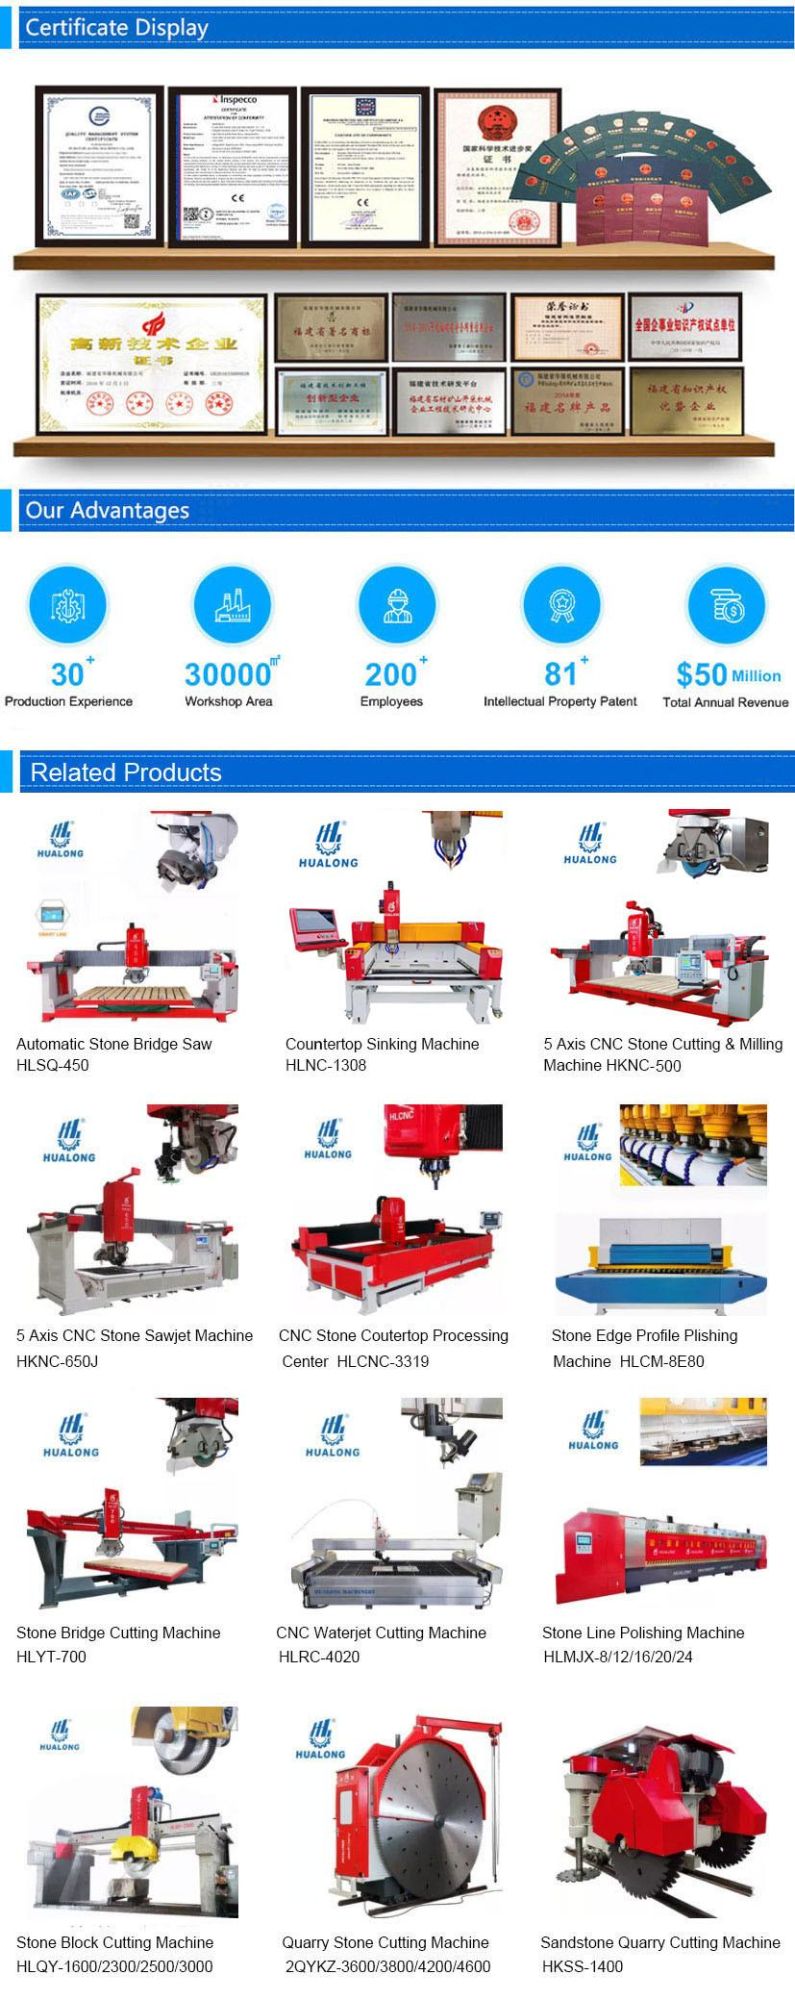 CNC High Water Pressure Stone Waterjet Cutting Machine Woodworking Water Jet Machinery Glass Cutting Ceramic Engraving Lettering Sink Cutout Tile Machine